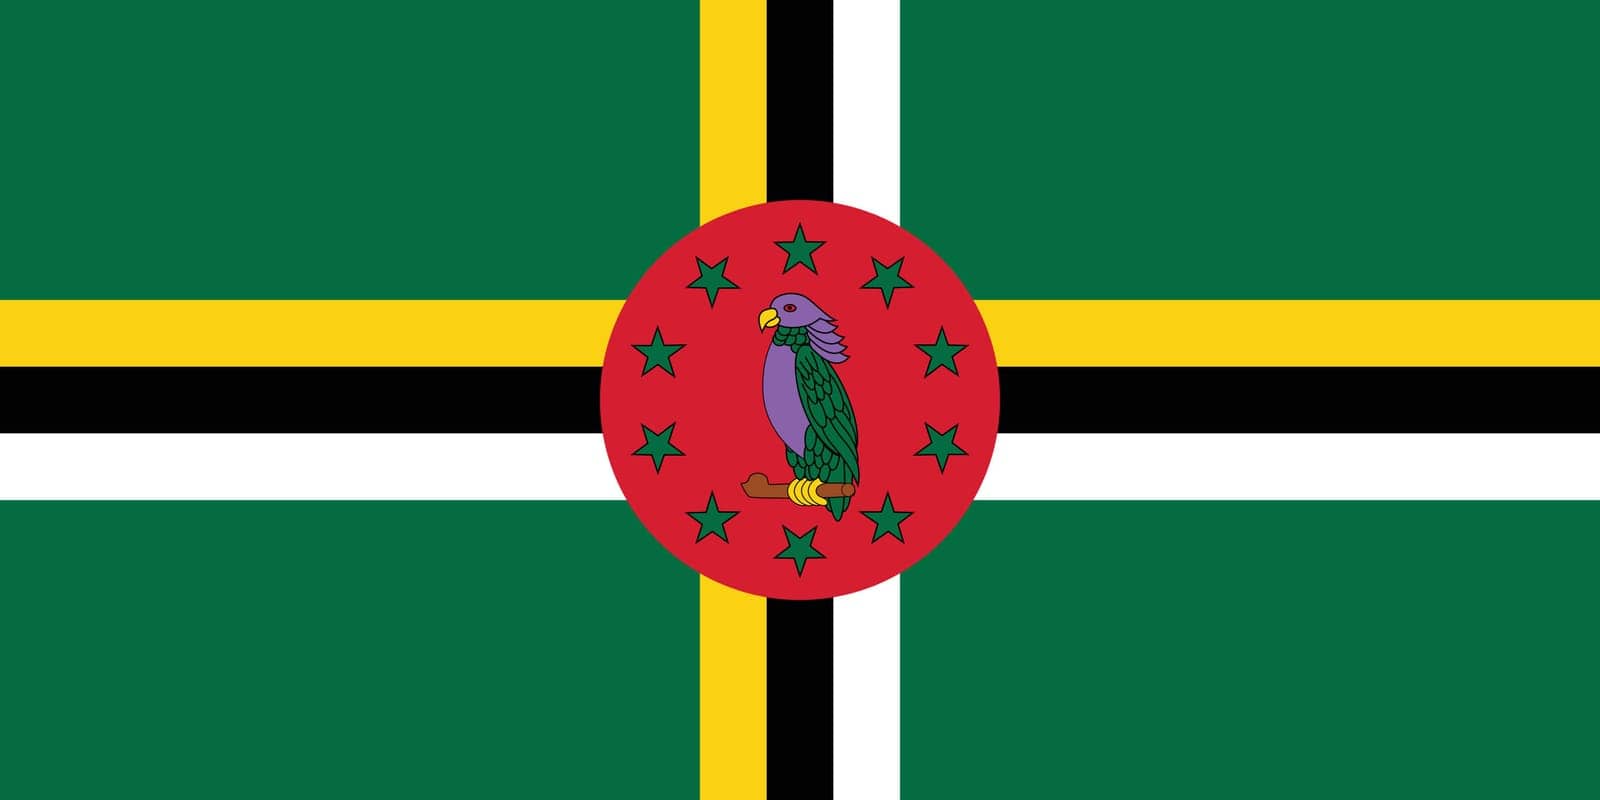 National flag of Dominica that can be used for celebrating national days. Vector illustration